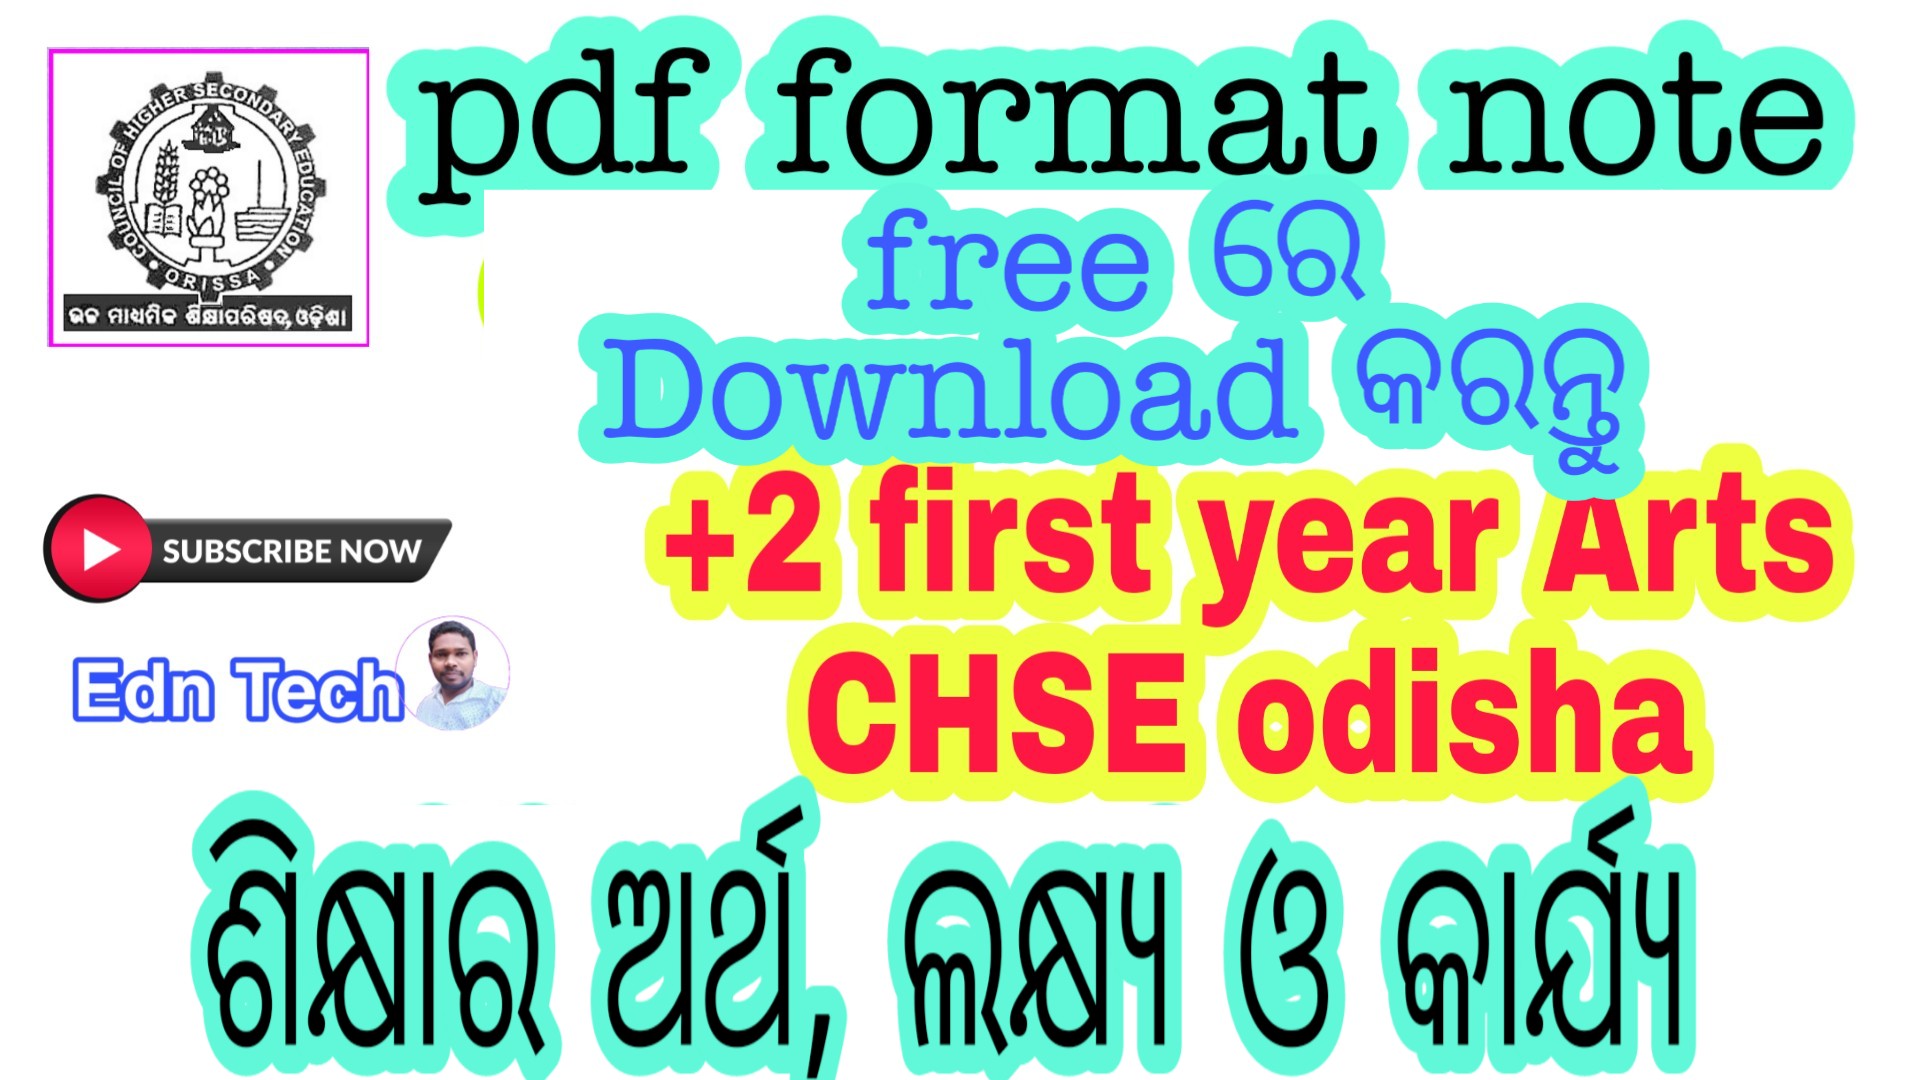 Download First Year Arts Education Note Chse Odisha Plus Two First Year Arts Note